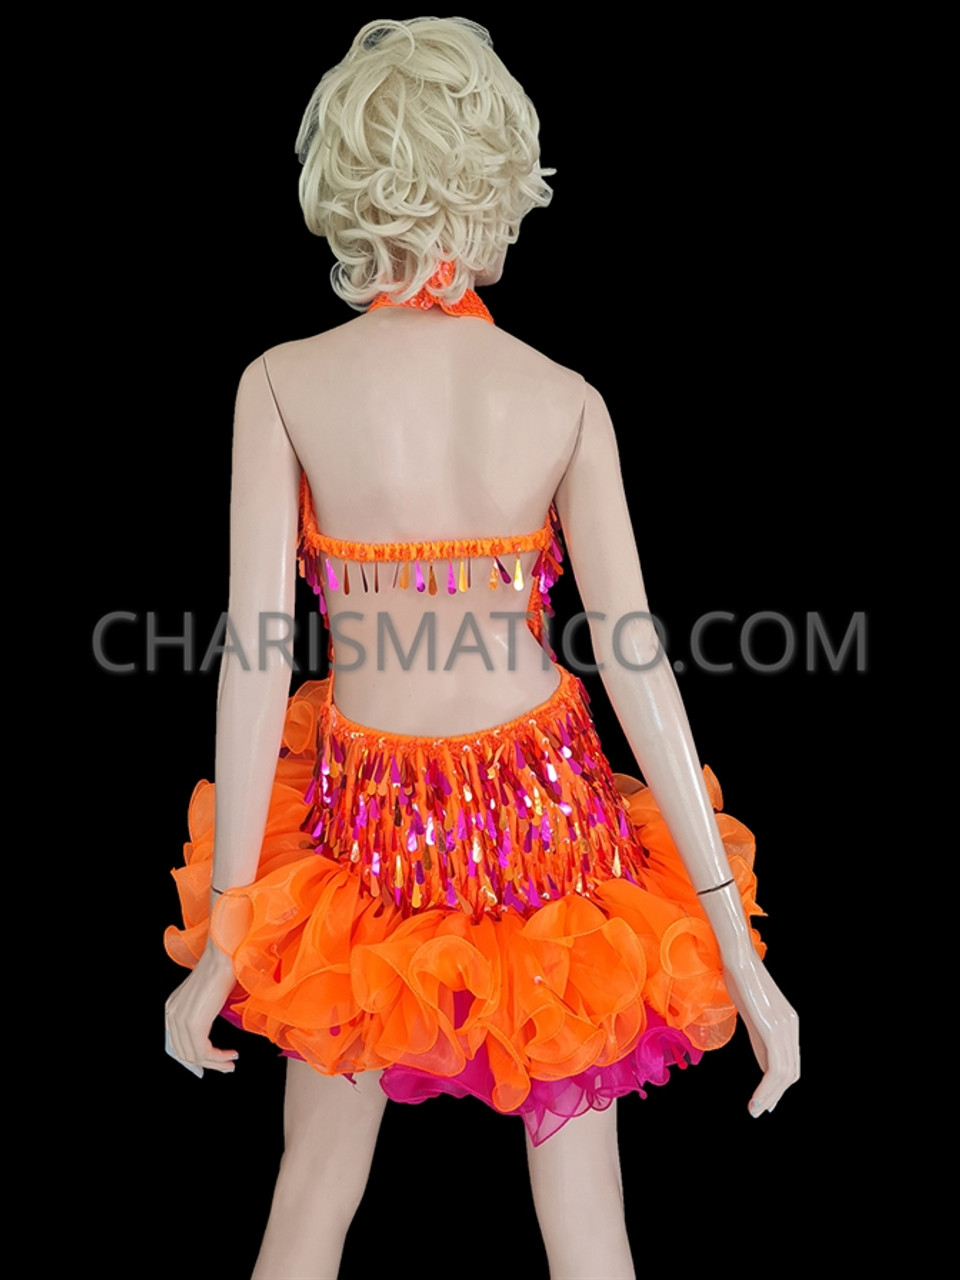 Sequin Backless Layered Orange Mambo Dance Dress with High Collar